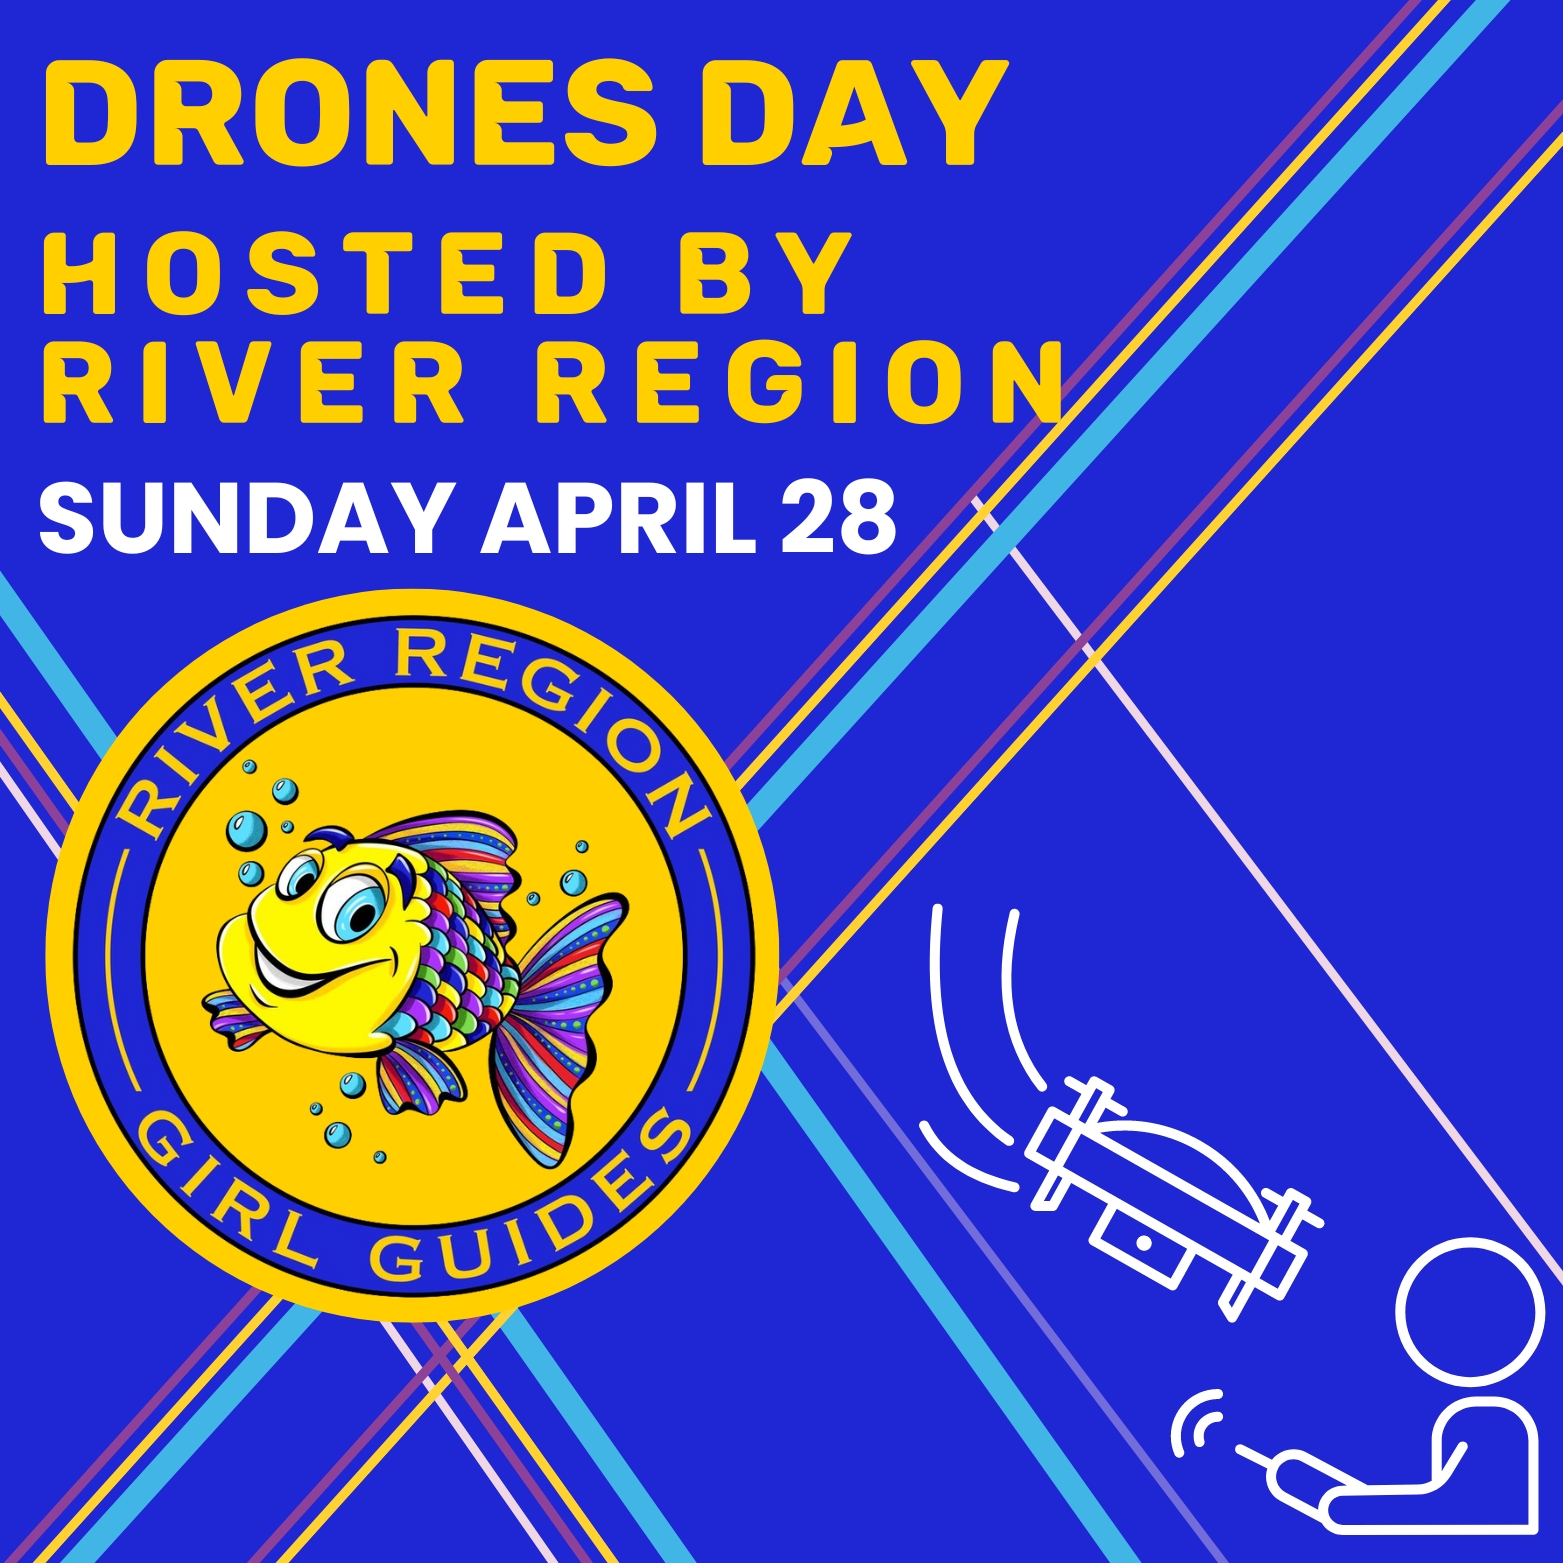 Drones Day - Hosted by River Region